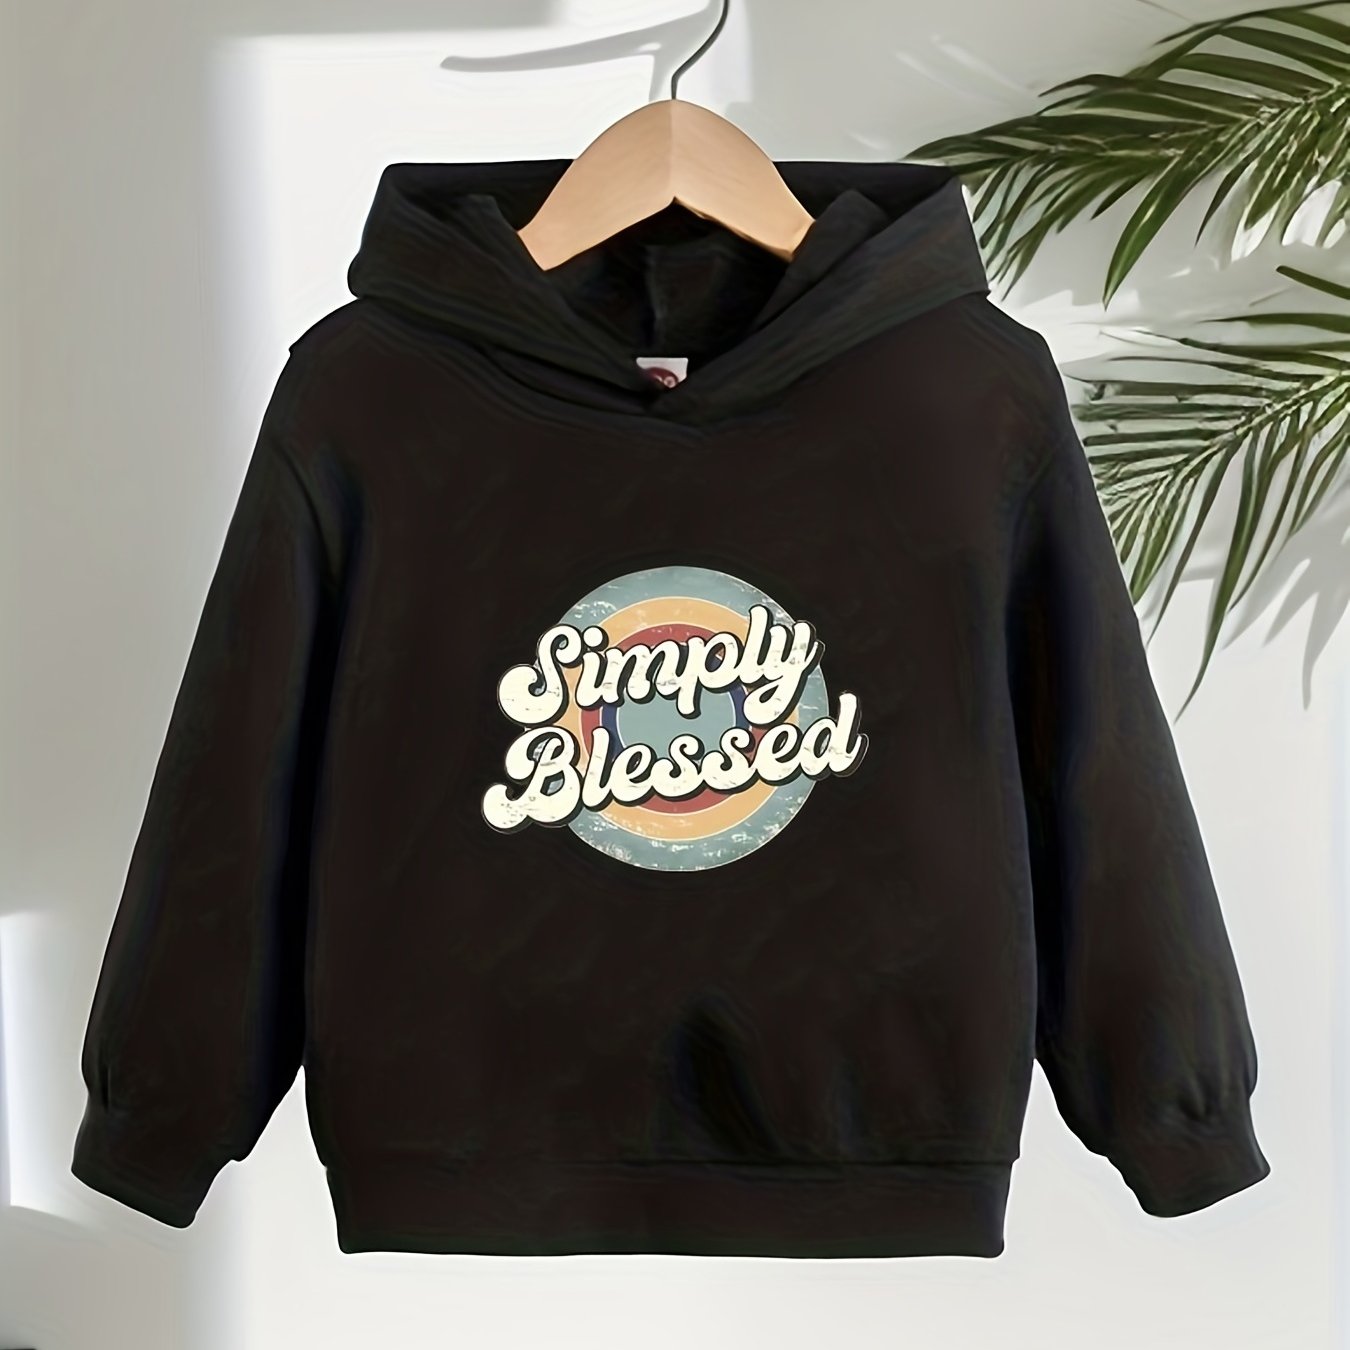 Simply Blessed Youth Christian Pullover Hooded Sweatshirt claimedbygoddesigns